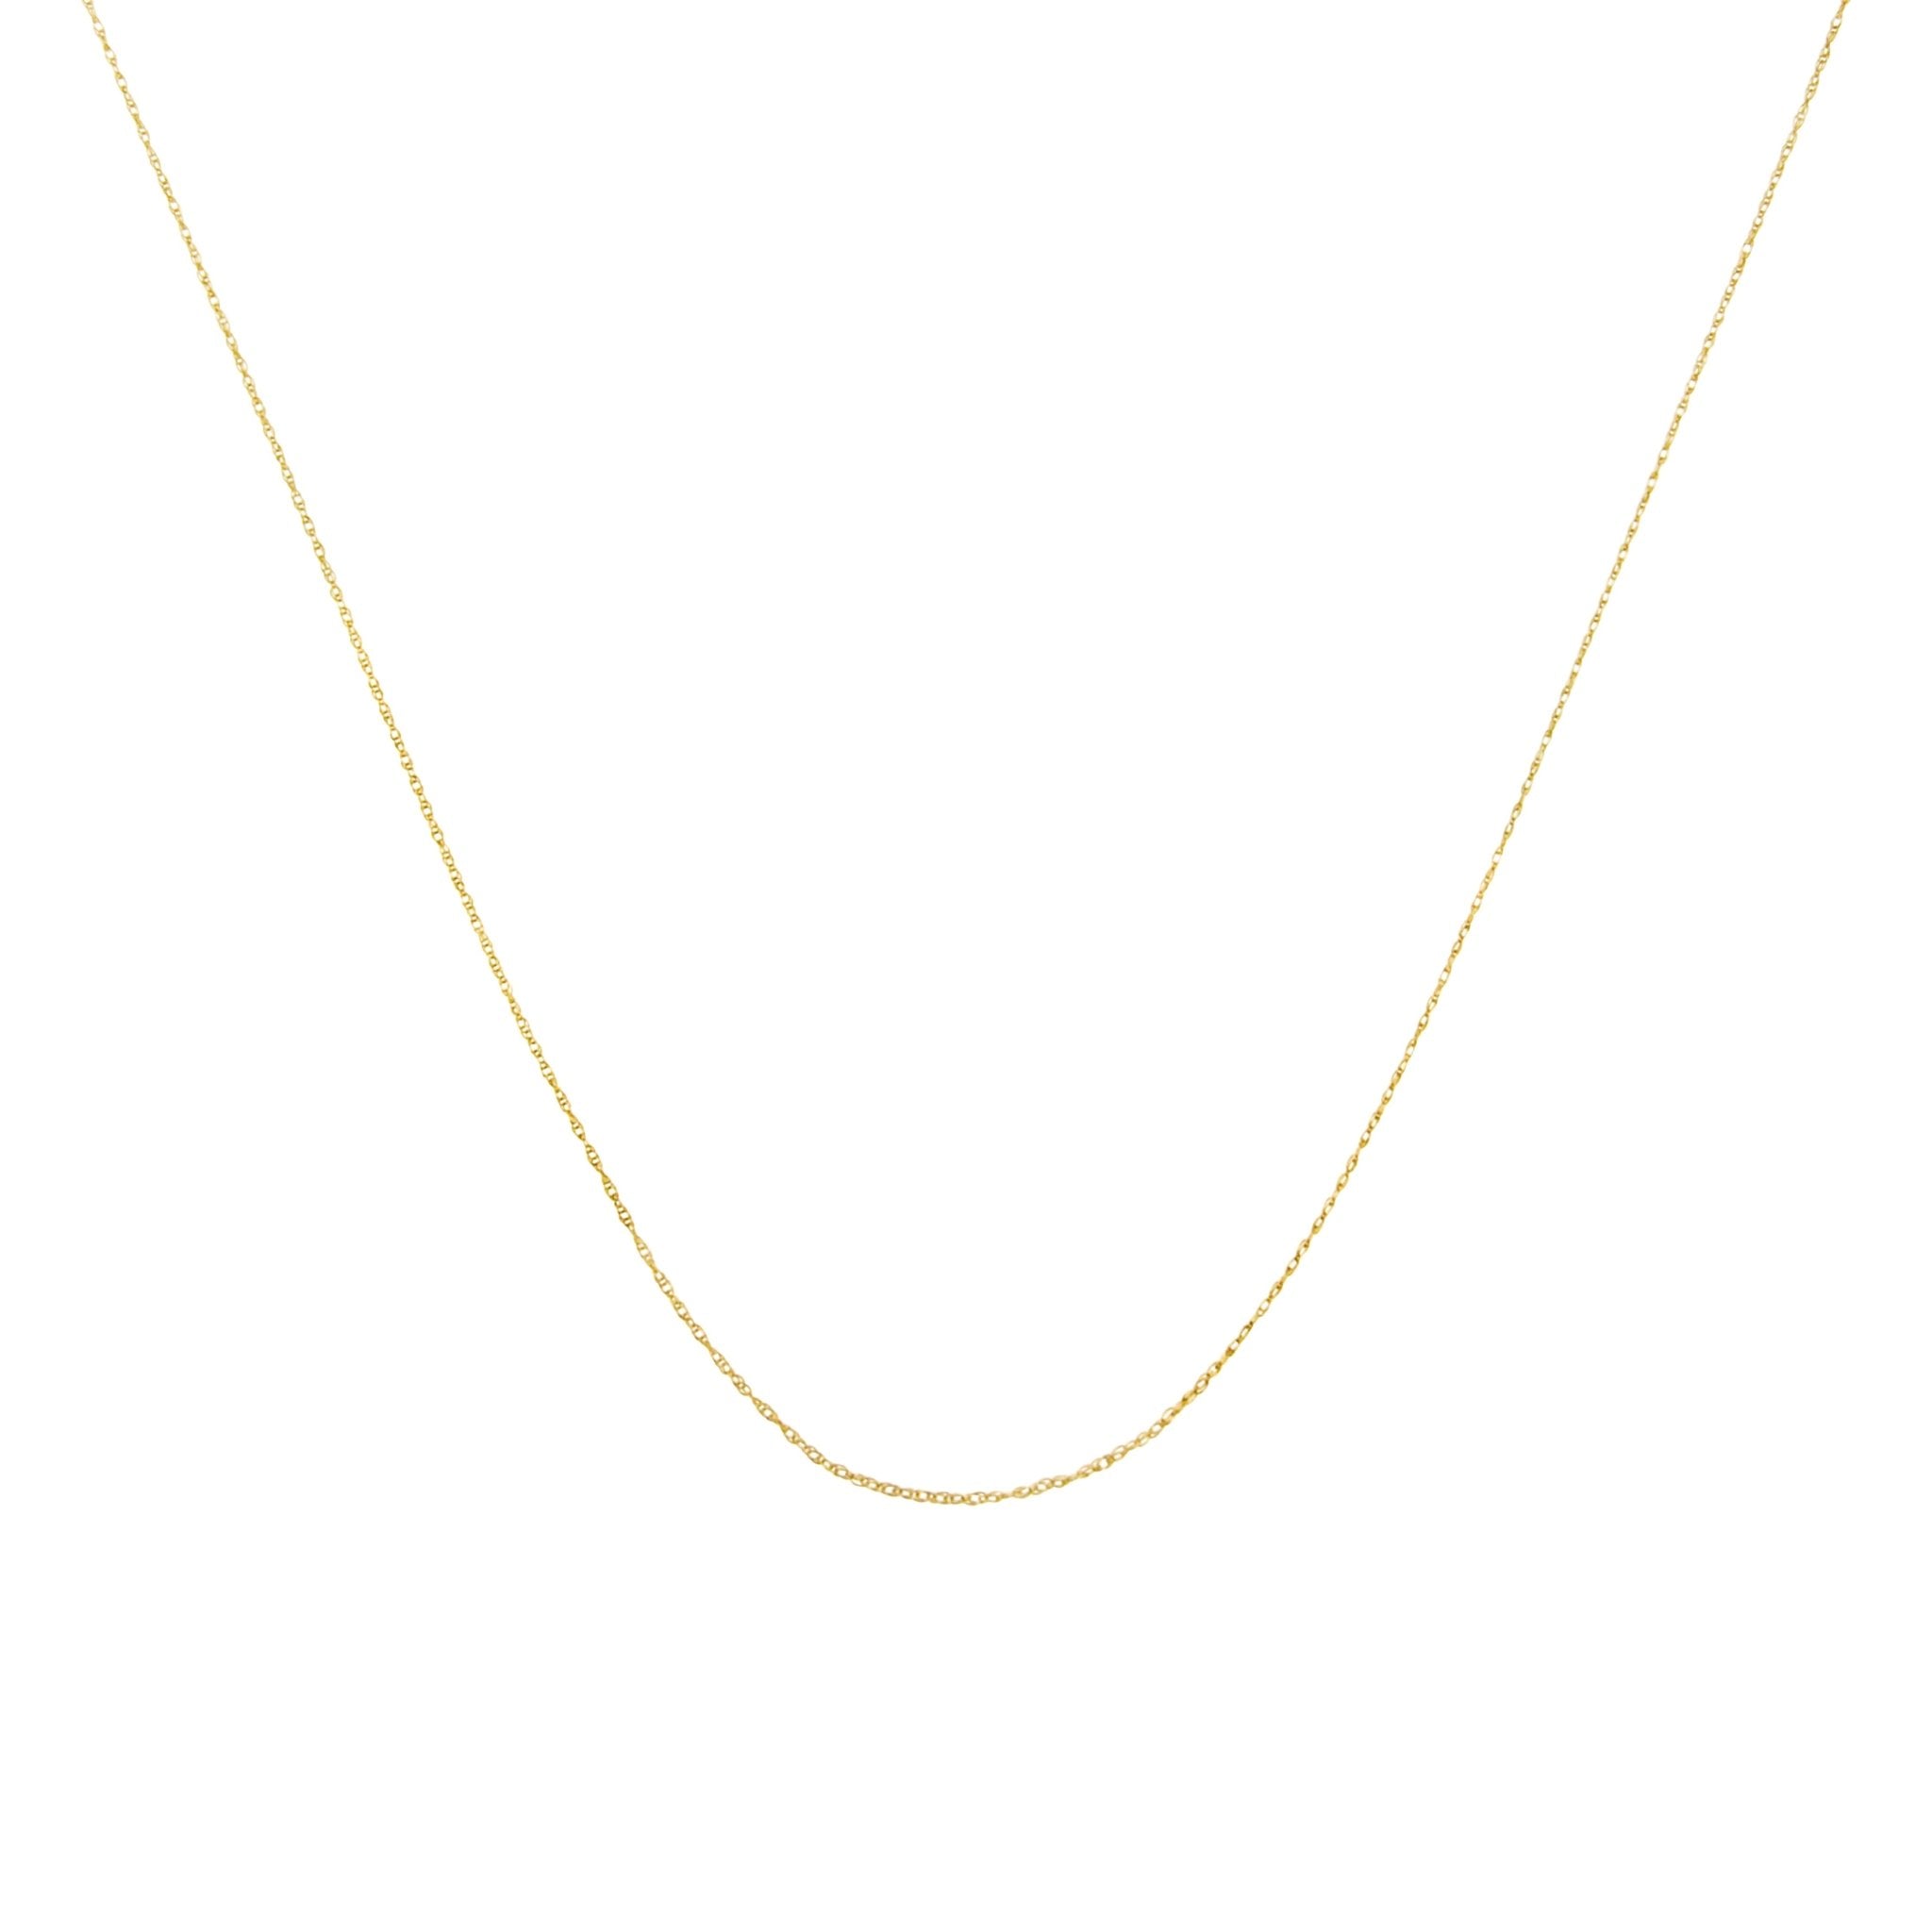 Solid 10K Yellow Gold 0.5Mm Rope Chain Necklace. Unisex Chain - Size 20